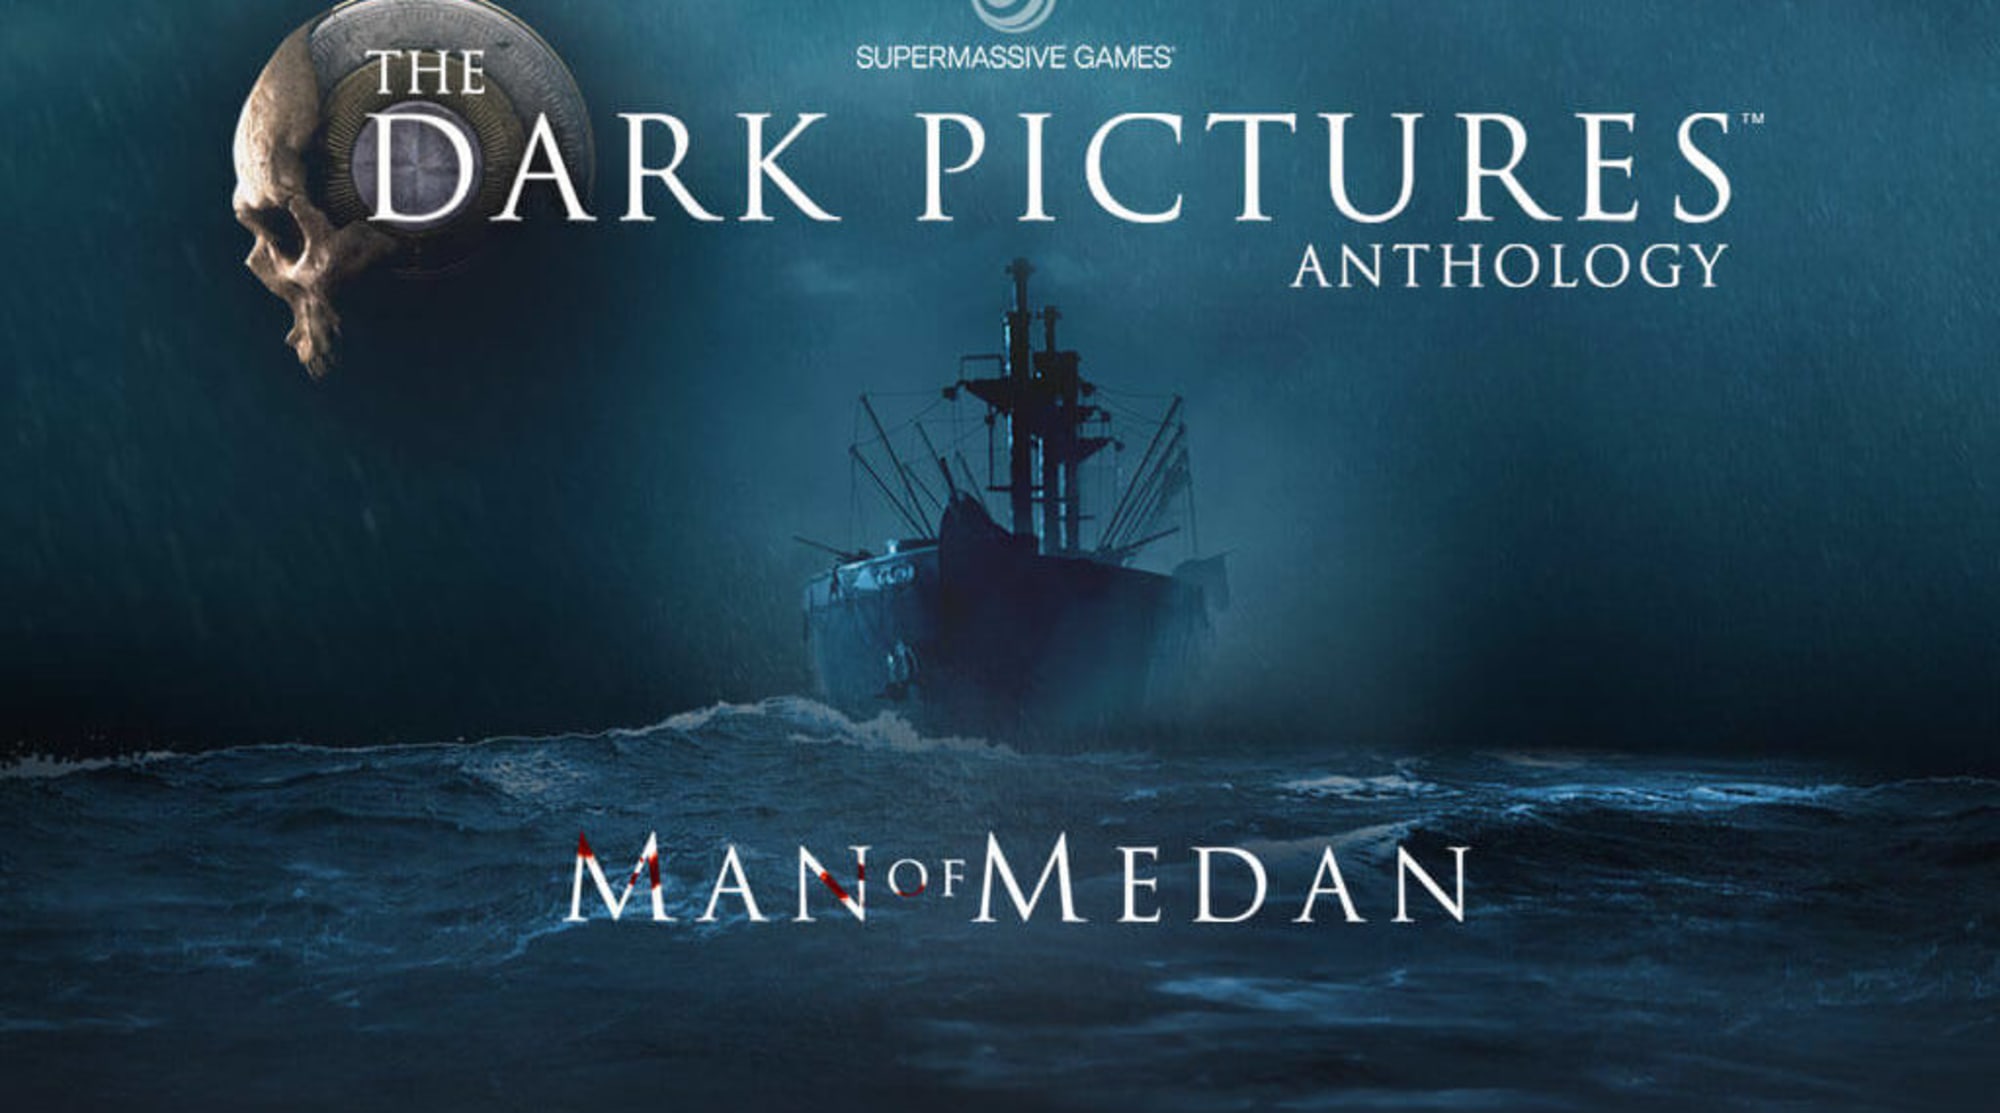 the dark pictures anthology games download free